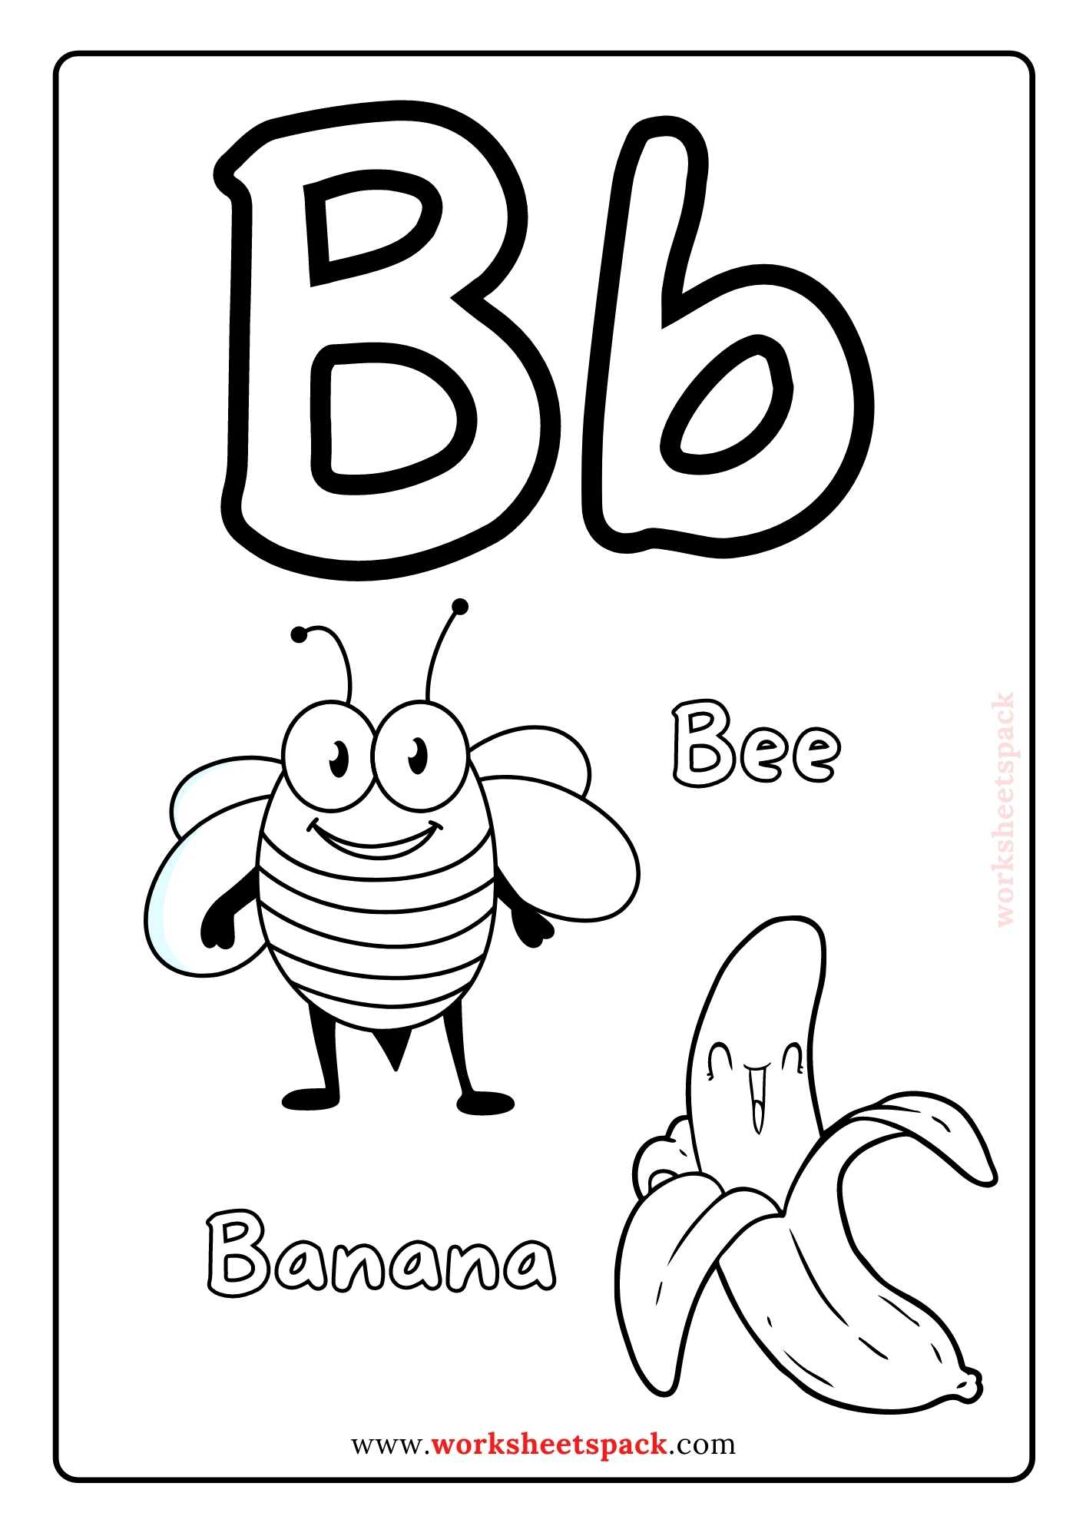 Alphabet Coloring Pages for 2 Year Olds - worksheetspack